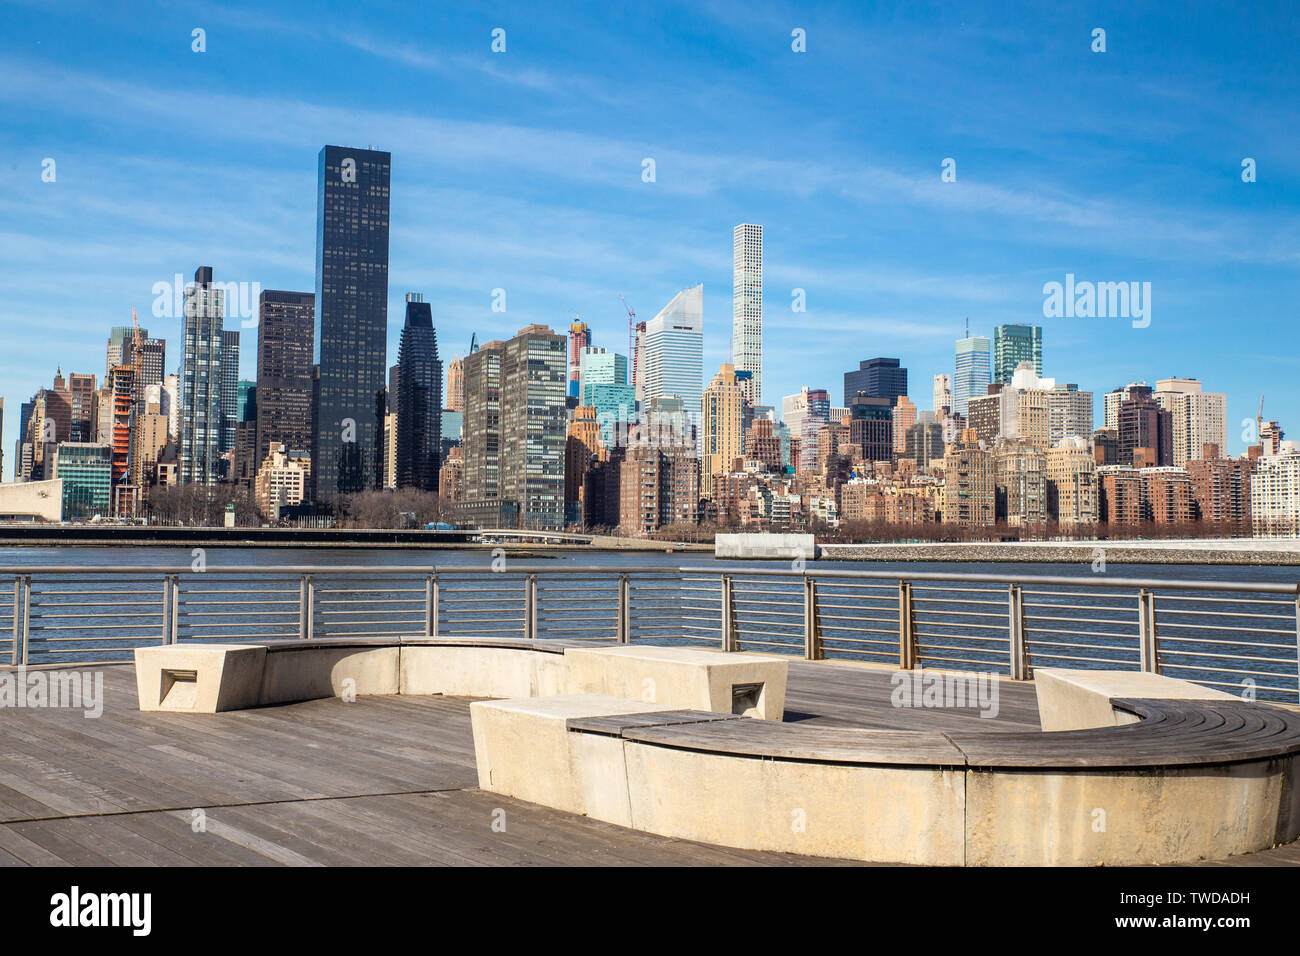 New York City skyline seen from Gantry State Park in Long Island City Queens looking towards Manhattan Stock Photo